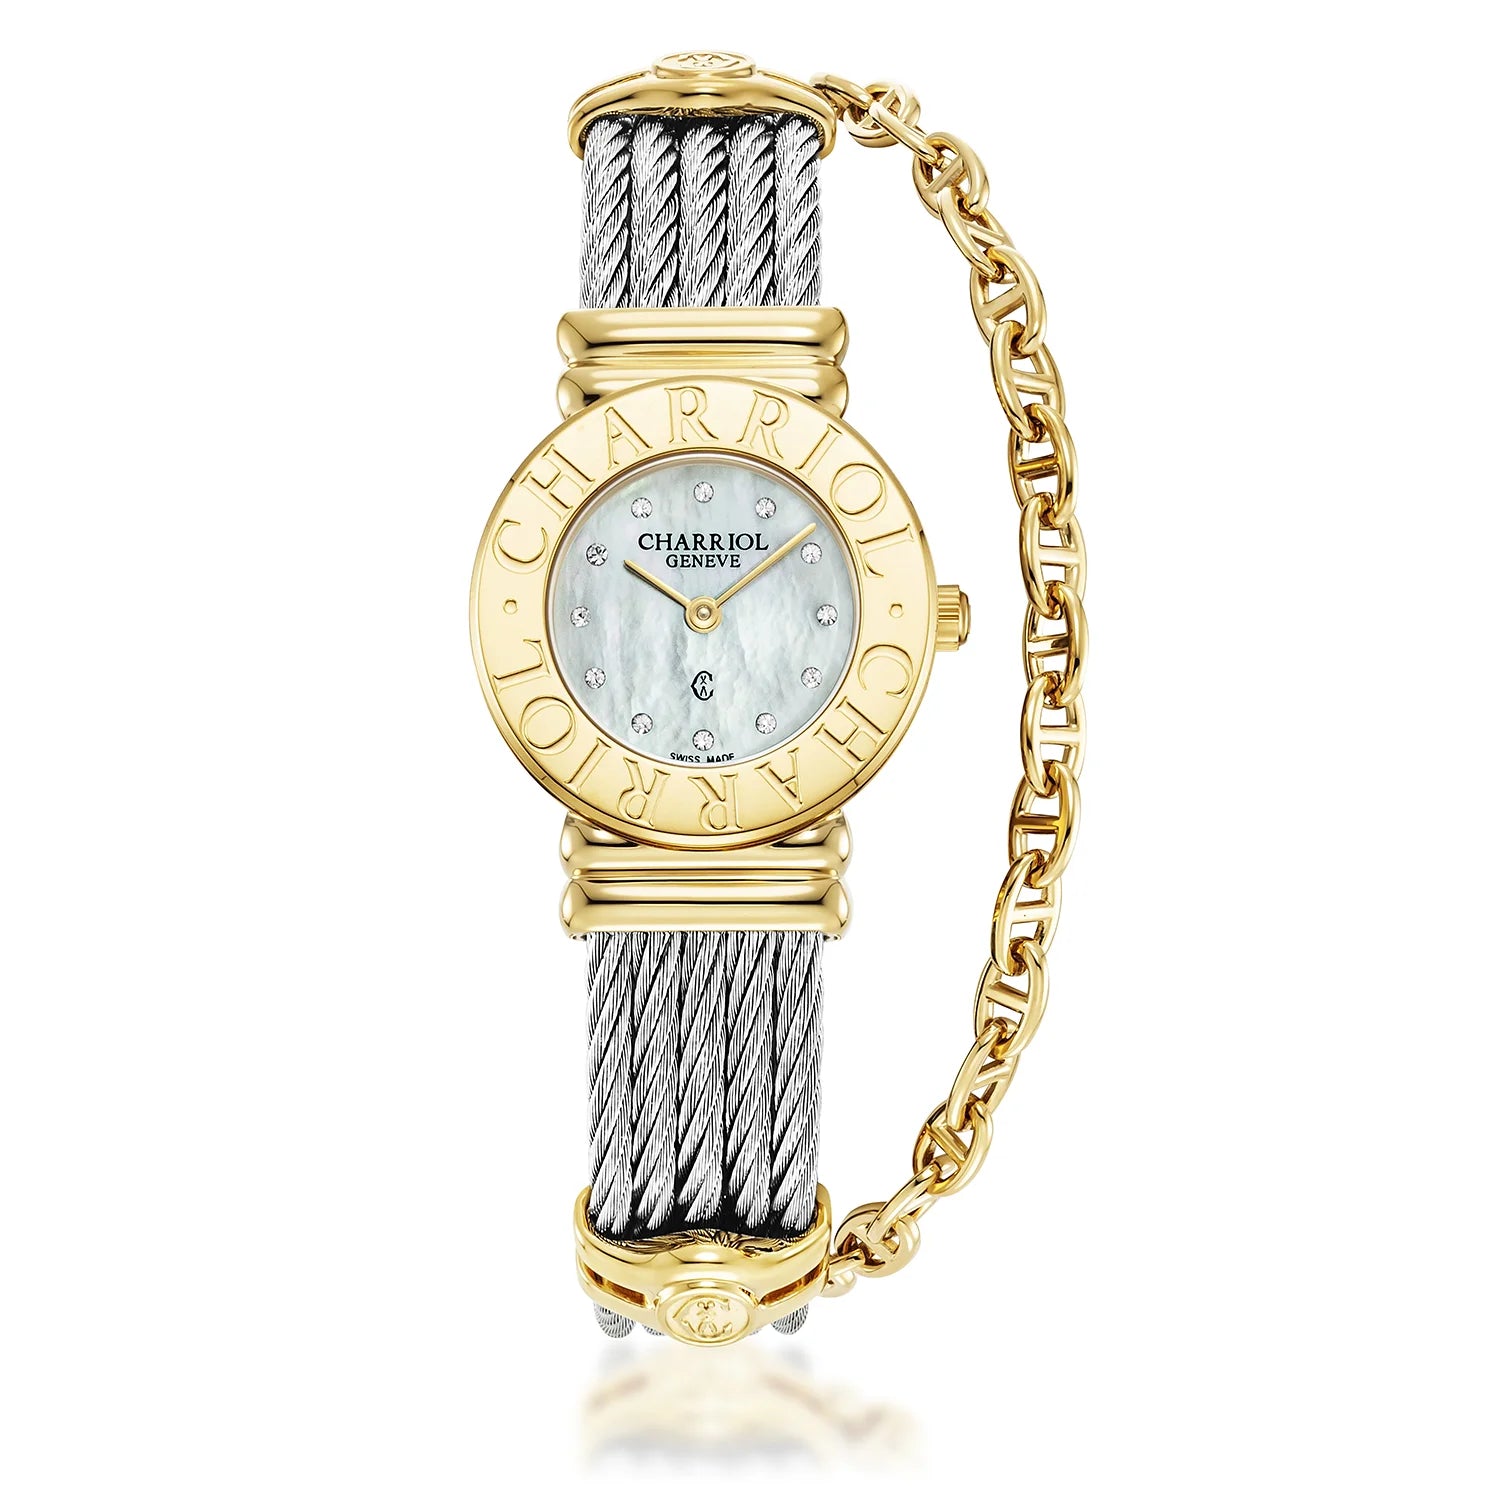 St Tropez Icon 24.5mm Watch Yellow Gold, Steel Cable, Charriol Bezel and 12 Diamonds White MOP Dial